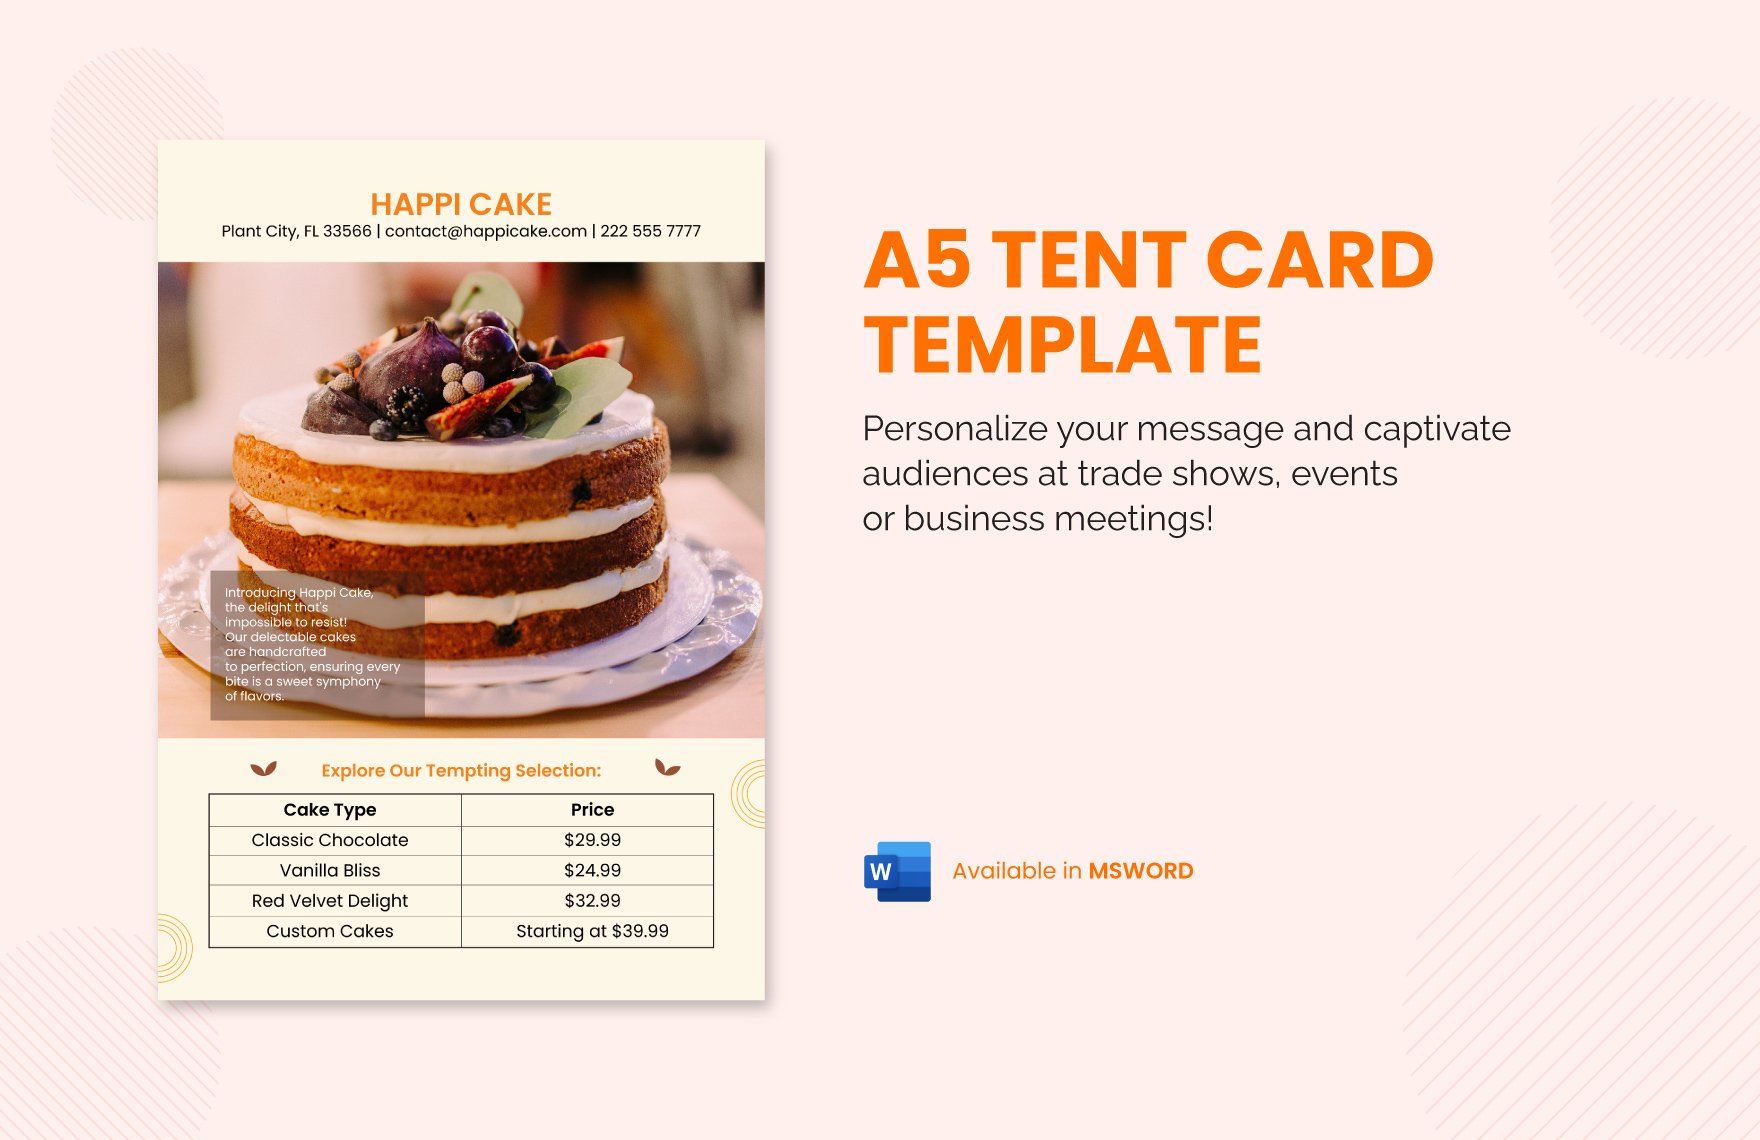 A5 Tent Card Template